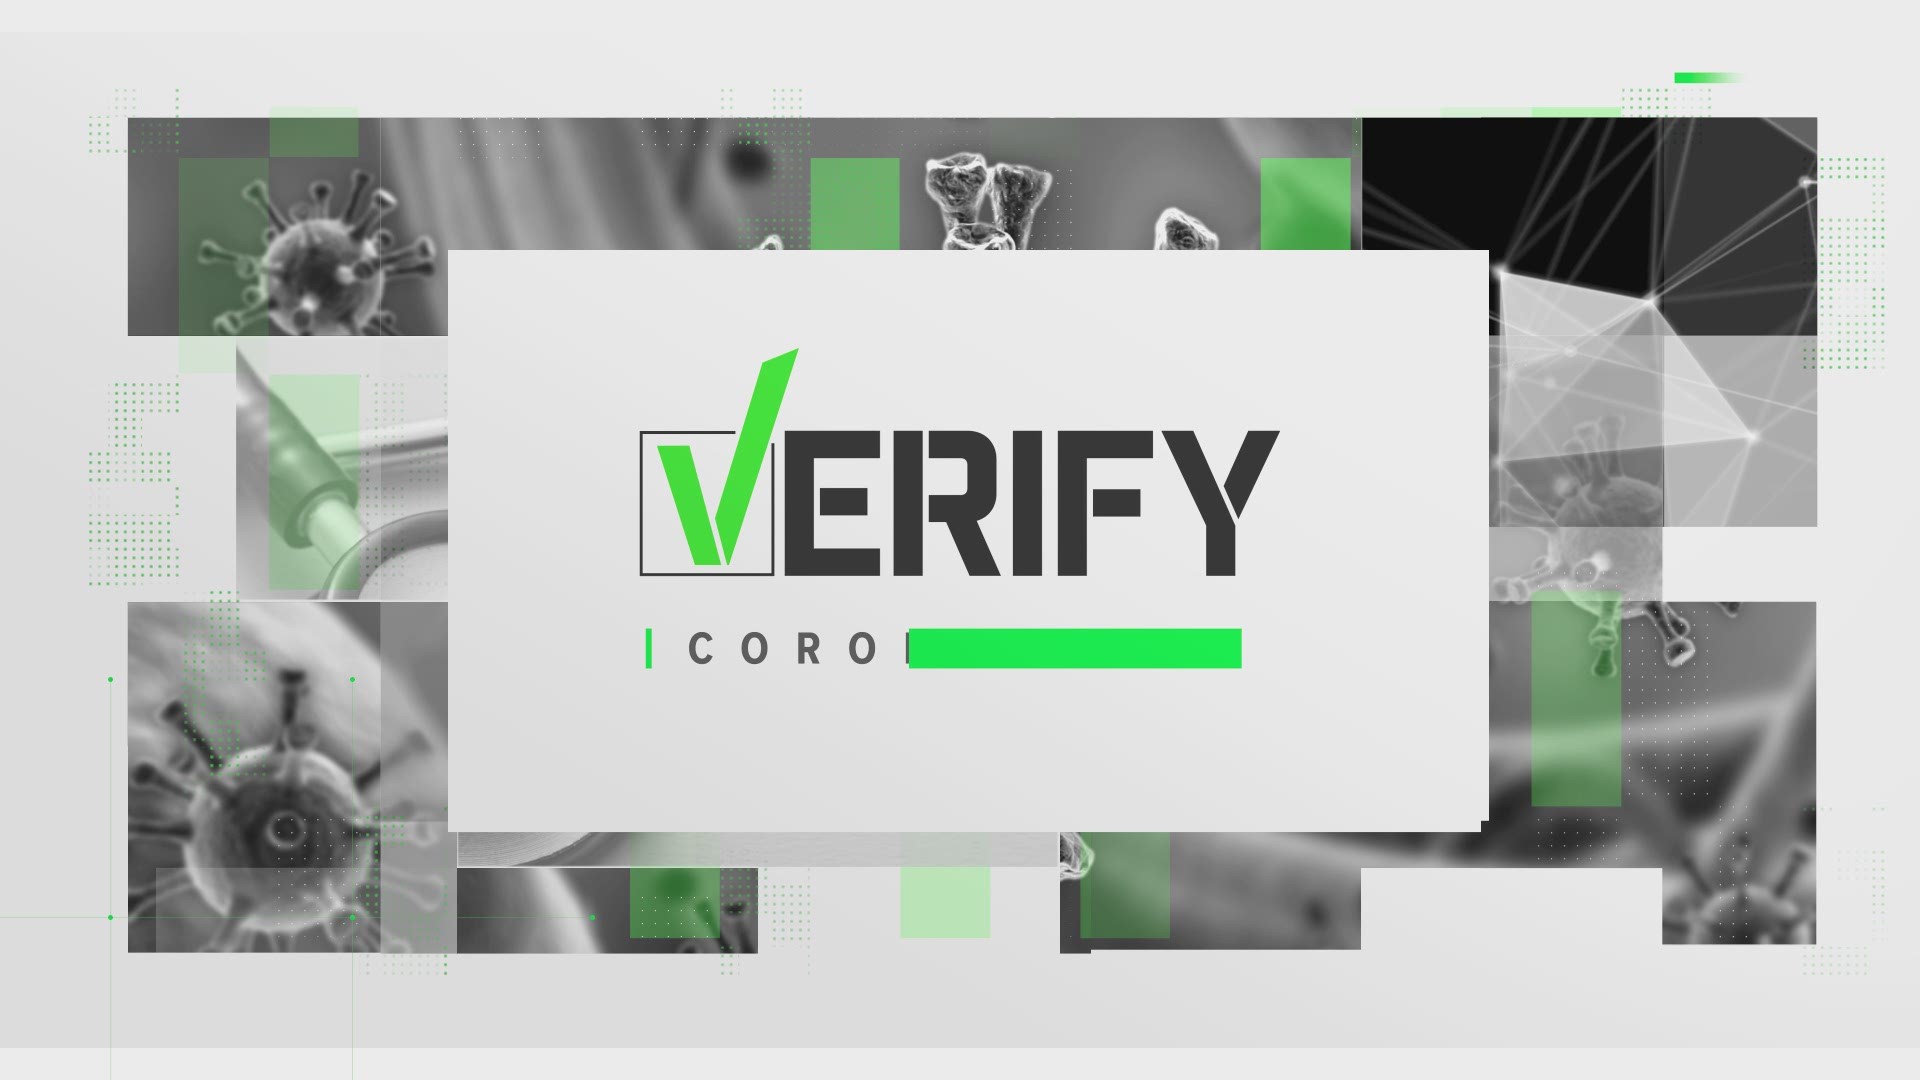 The Verify team spoke with lawmakers and looked through the new bill, to answer some of the biggest viewer questions about the second round of stimulus checks.